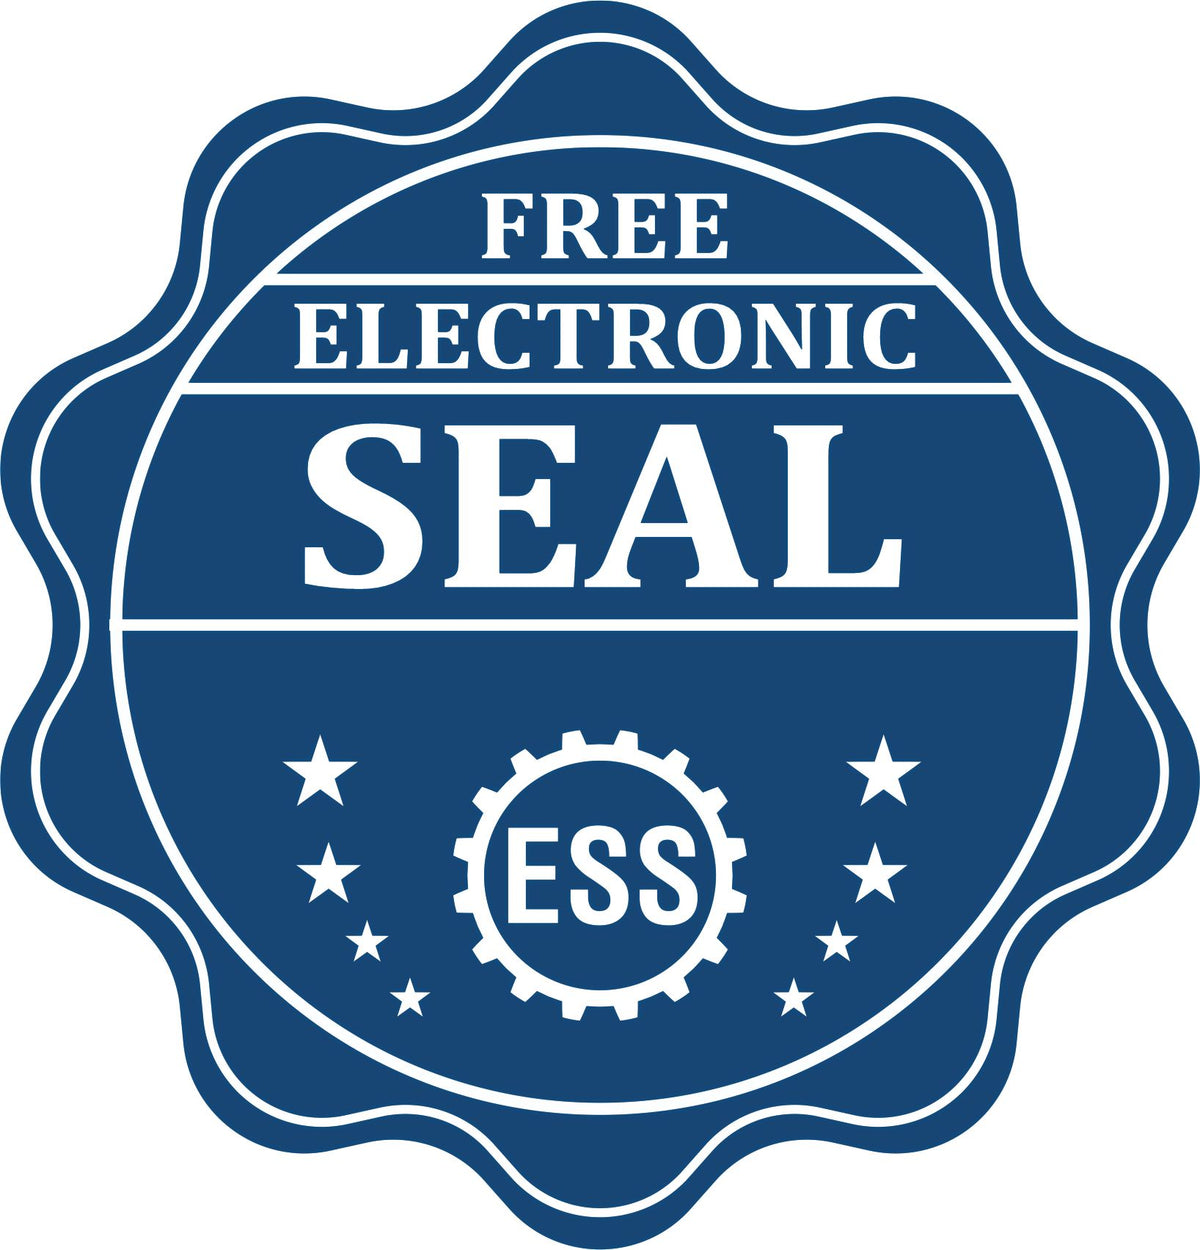 A badge showing a free electronic seal for the Hybrid New Mexico Engineer Seal with stars and the ESS gear on the emblem.